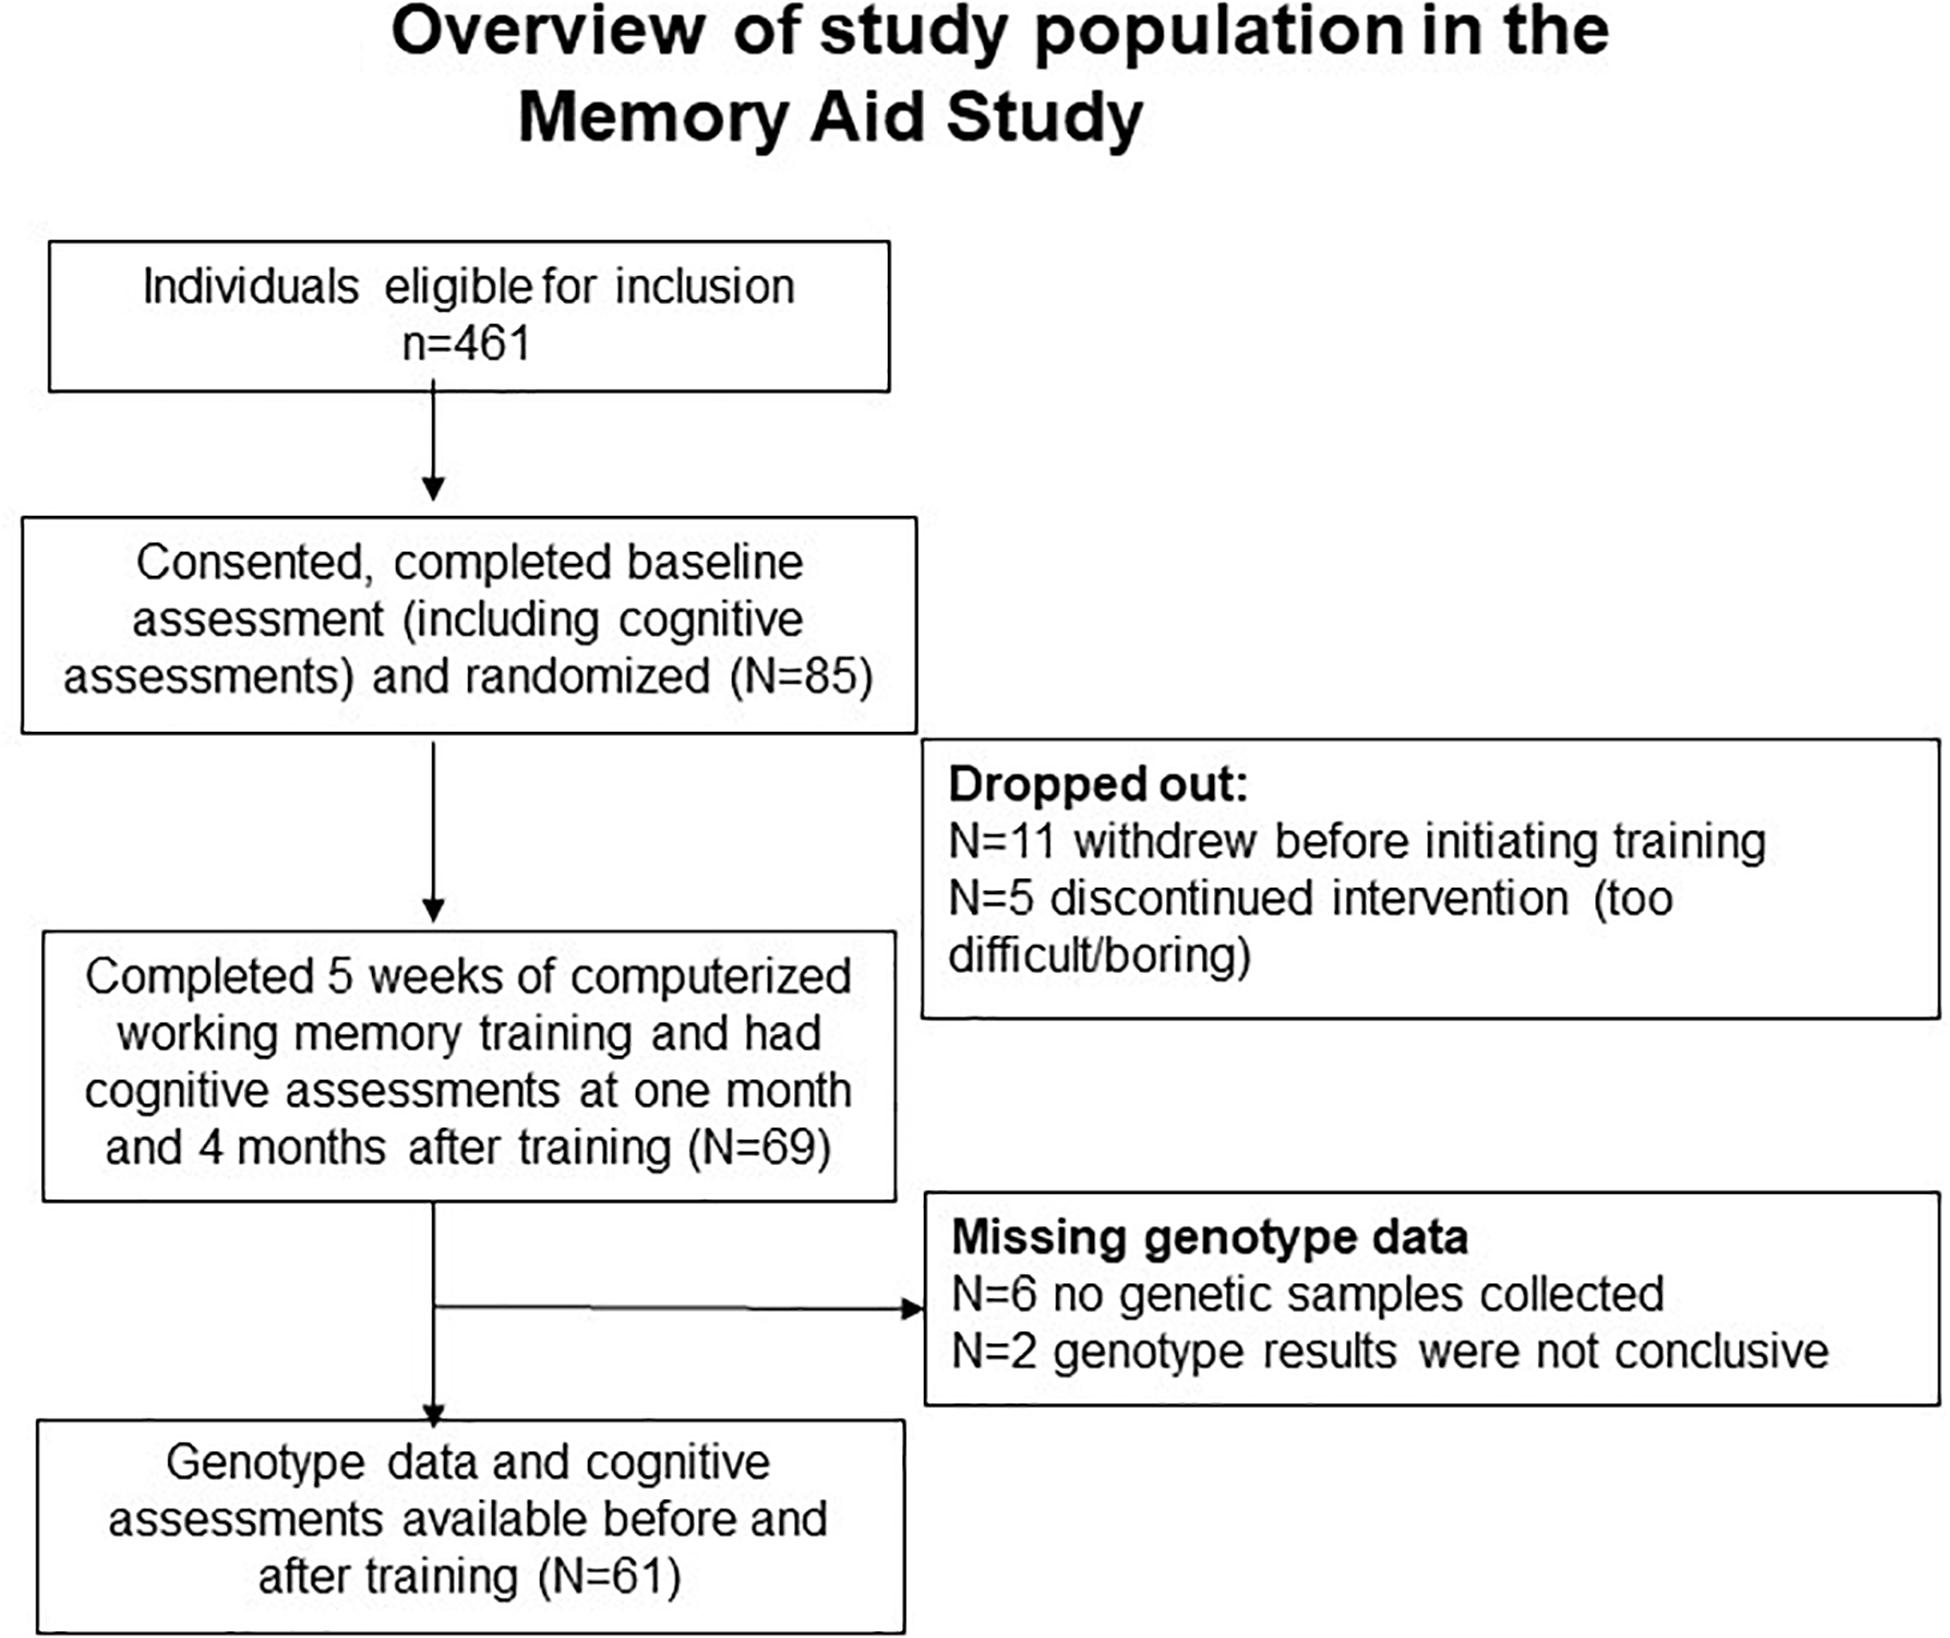 Frontiers Working Memory Training In Amnestic And Non Amnestic Patients With Mild Cognitive Impairment Preliminary Findings From Genotype Variants On Training Effects Frontiers In Aging Neuroscience